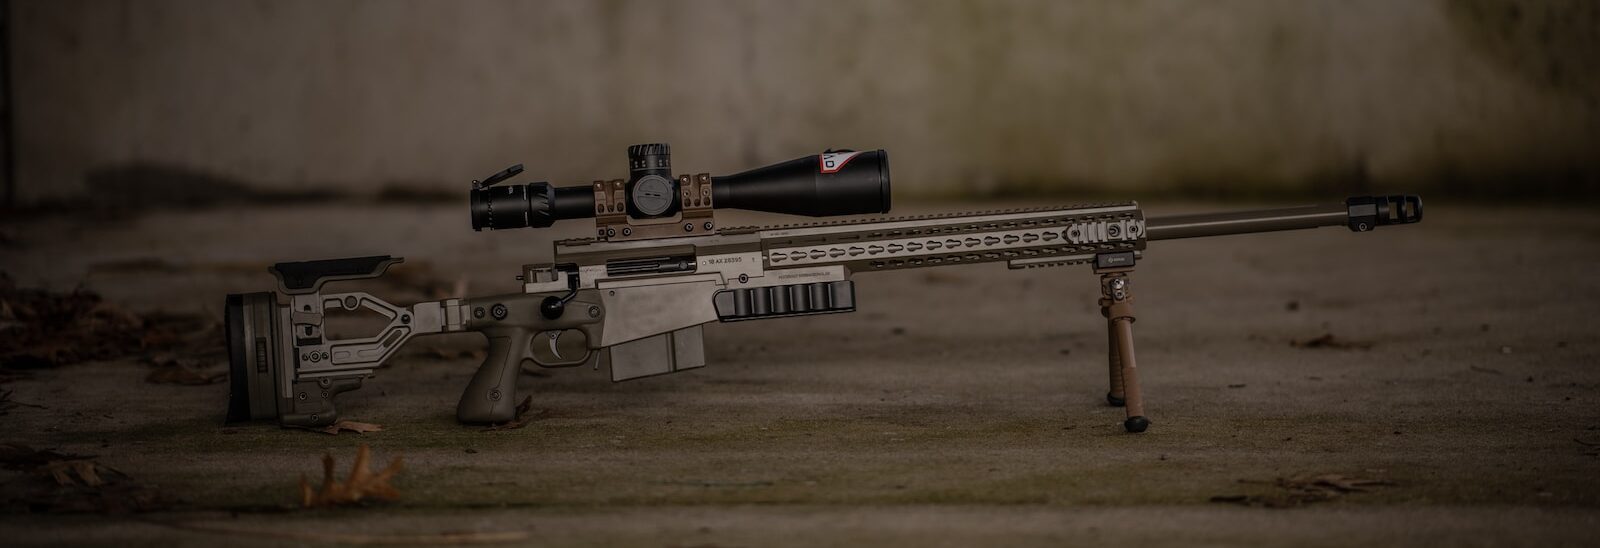 lightest 30-06 battle rifle - a rifle laying on the ground with a scope